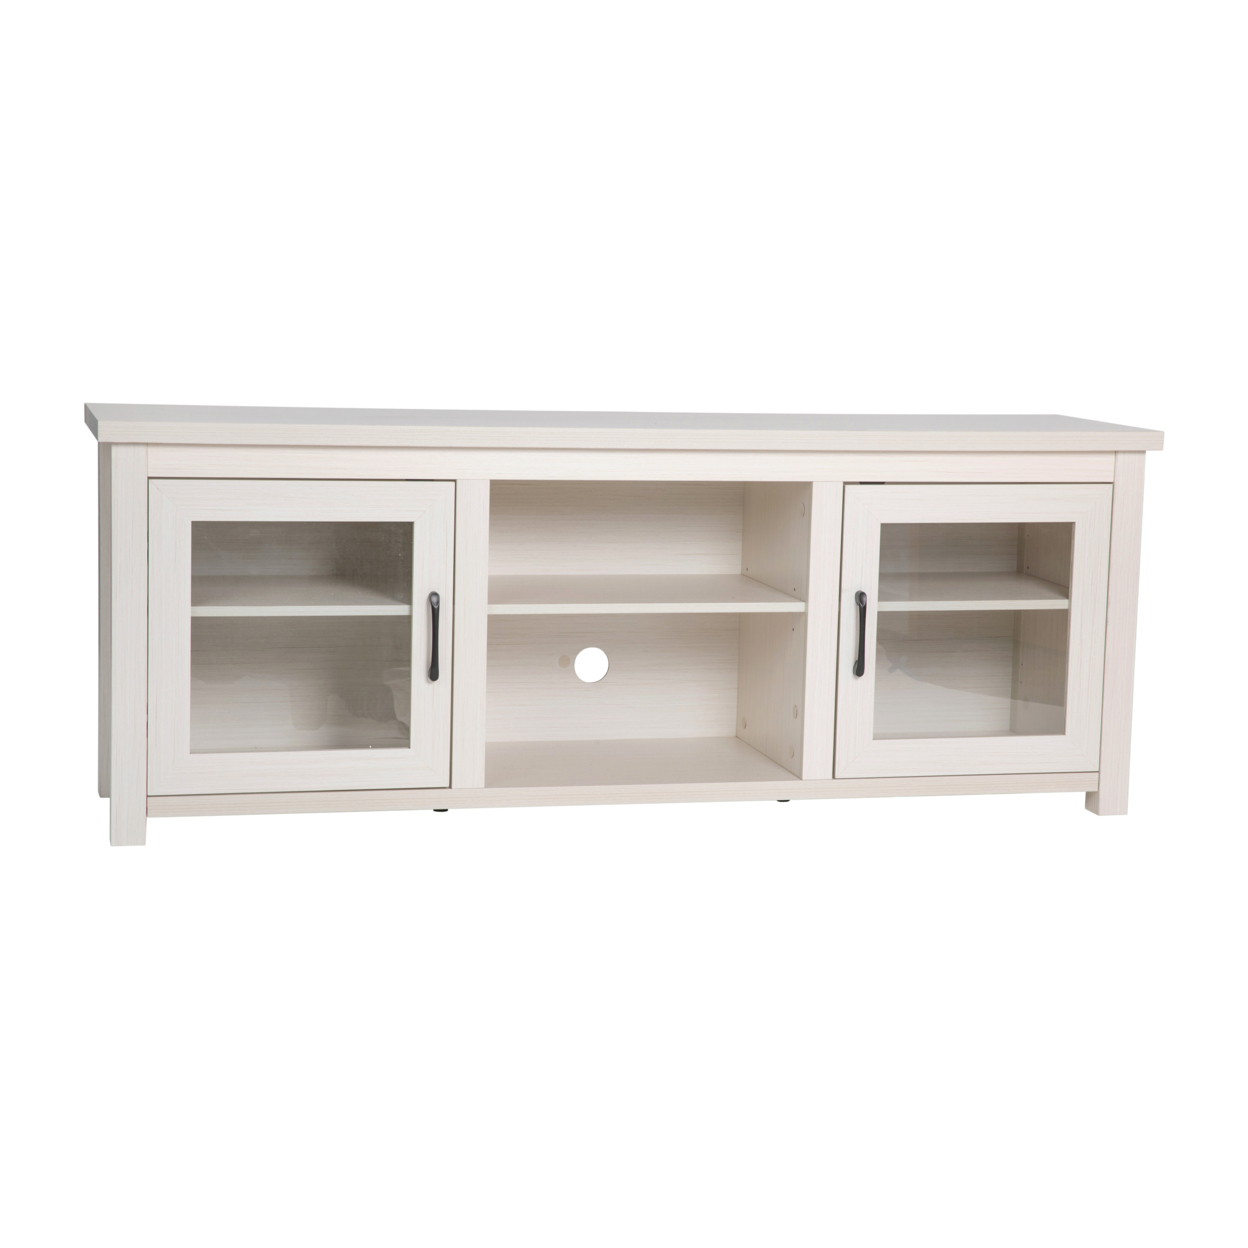 Sheffield Classic TV Stand Up To 80 TVs - Modern White Wash Finish With Full Glass Doors - 65 Engineered Wood Frame - 3 Shelves